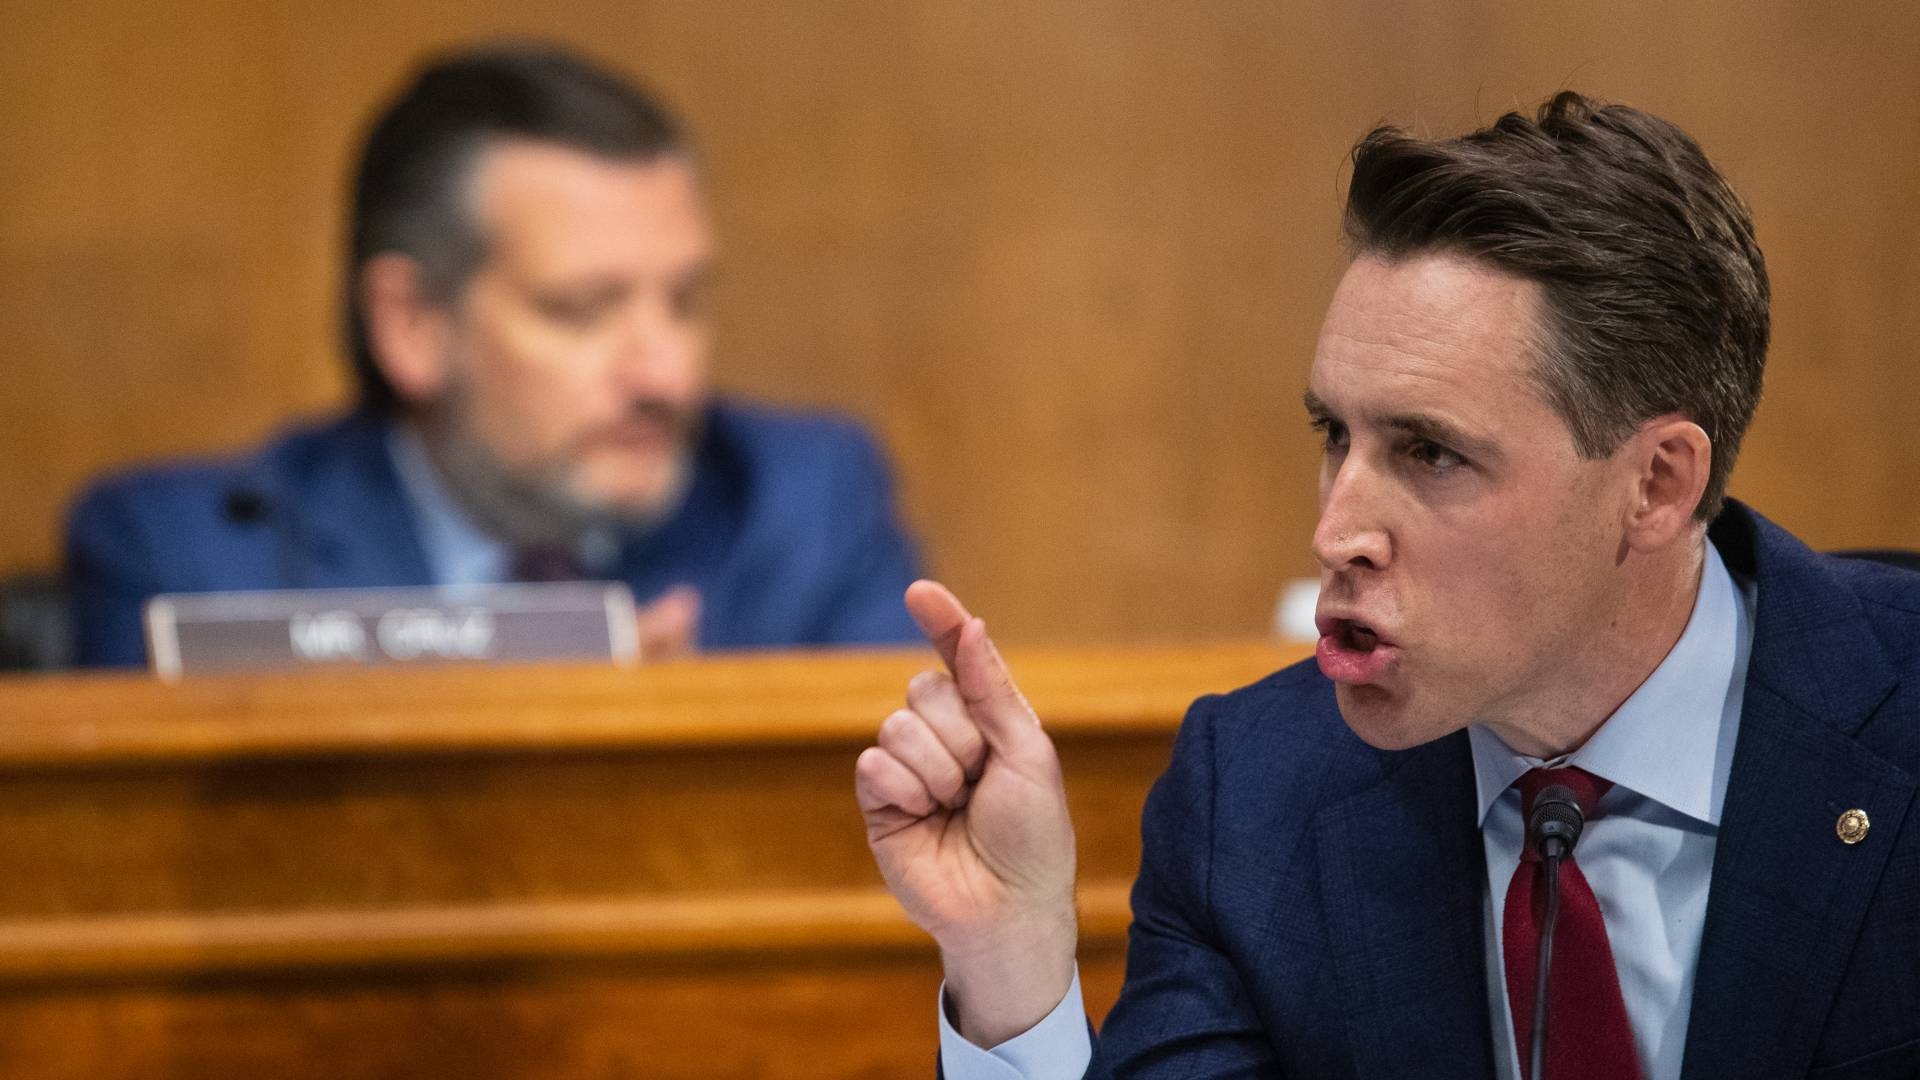 Republican Senator Josh Hawley said he objected on behalf of his Republican colleagues to Nides' appointment.